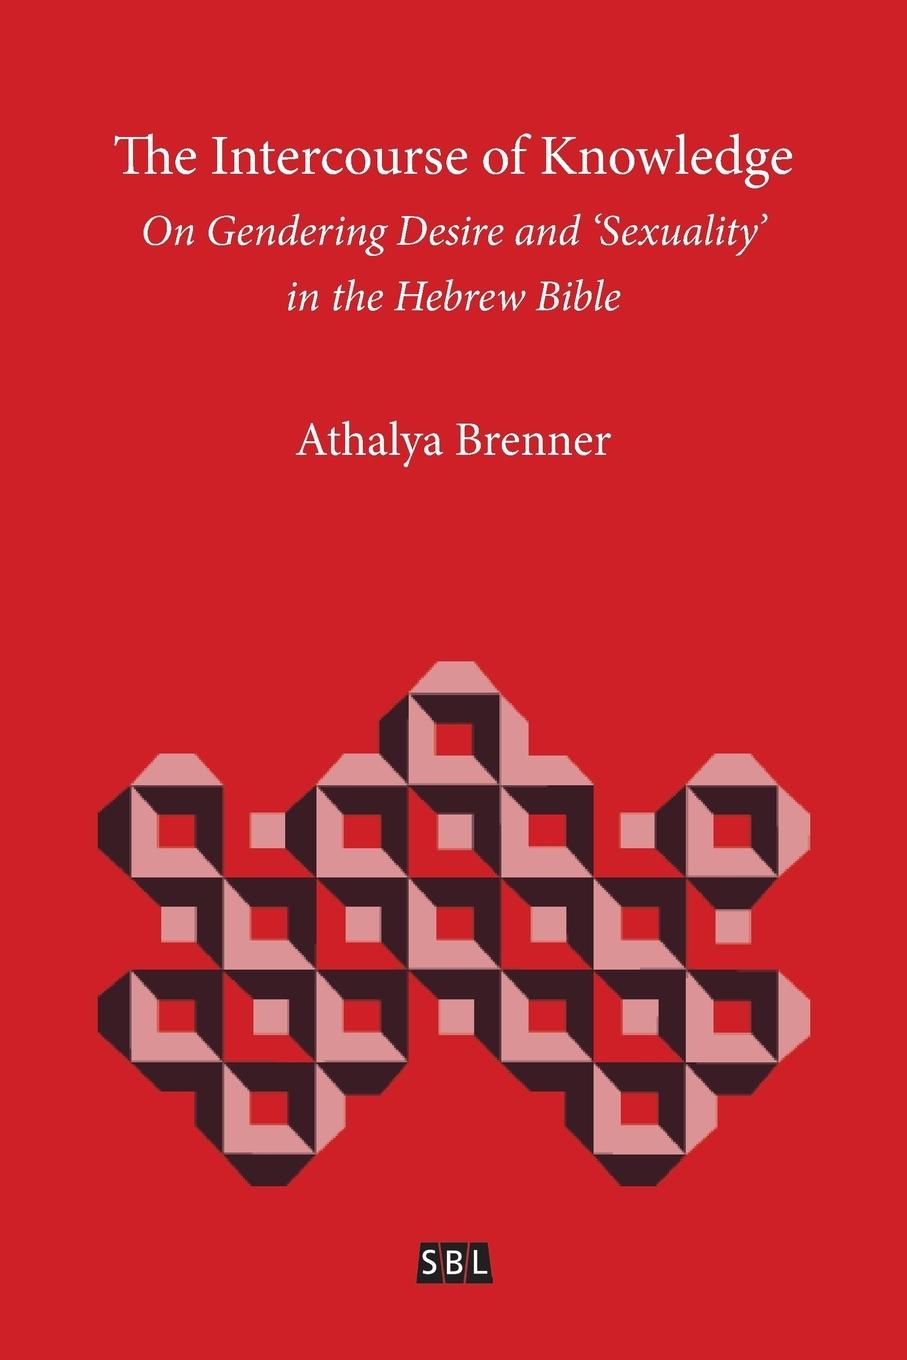 The Intercourse of Knowledge - Brenner, Athalya